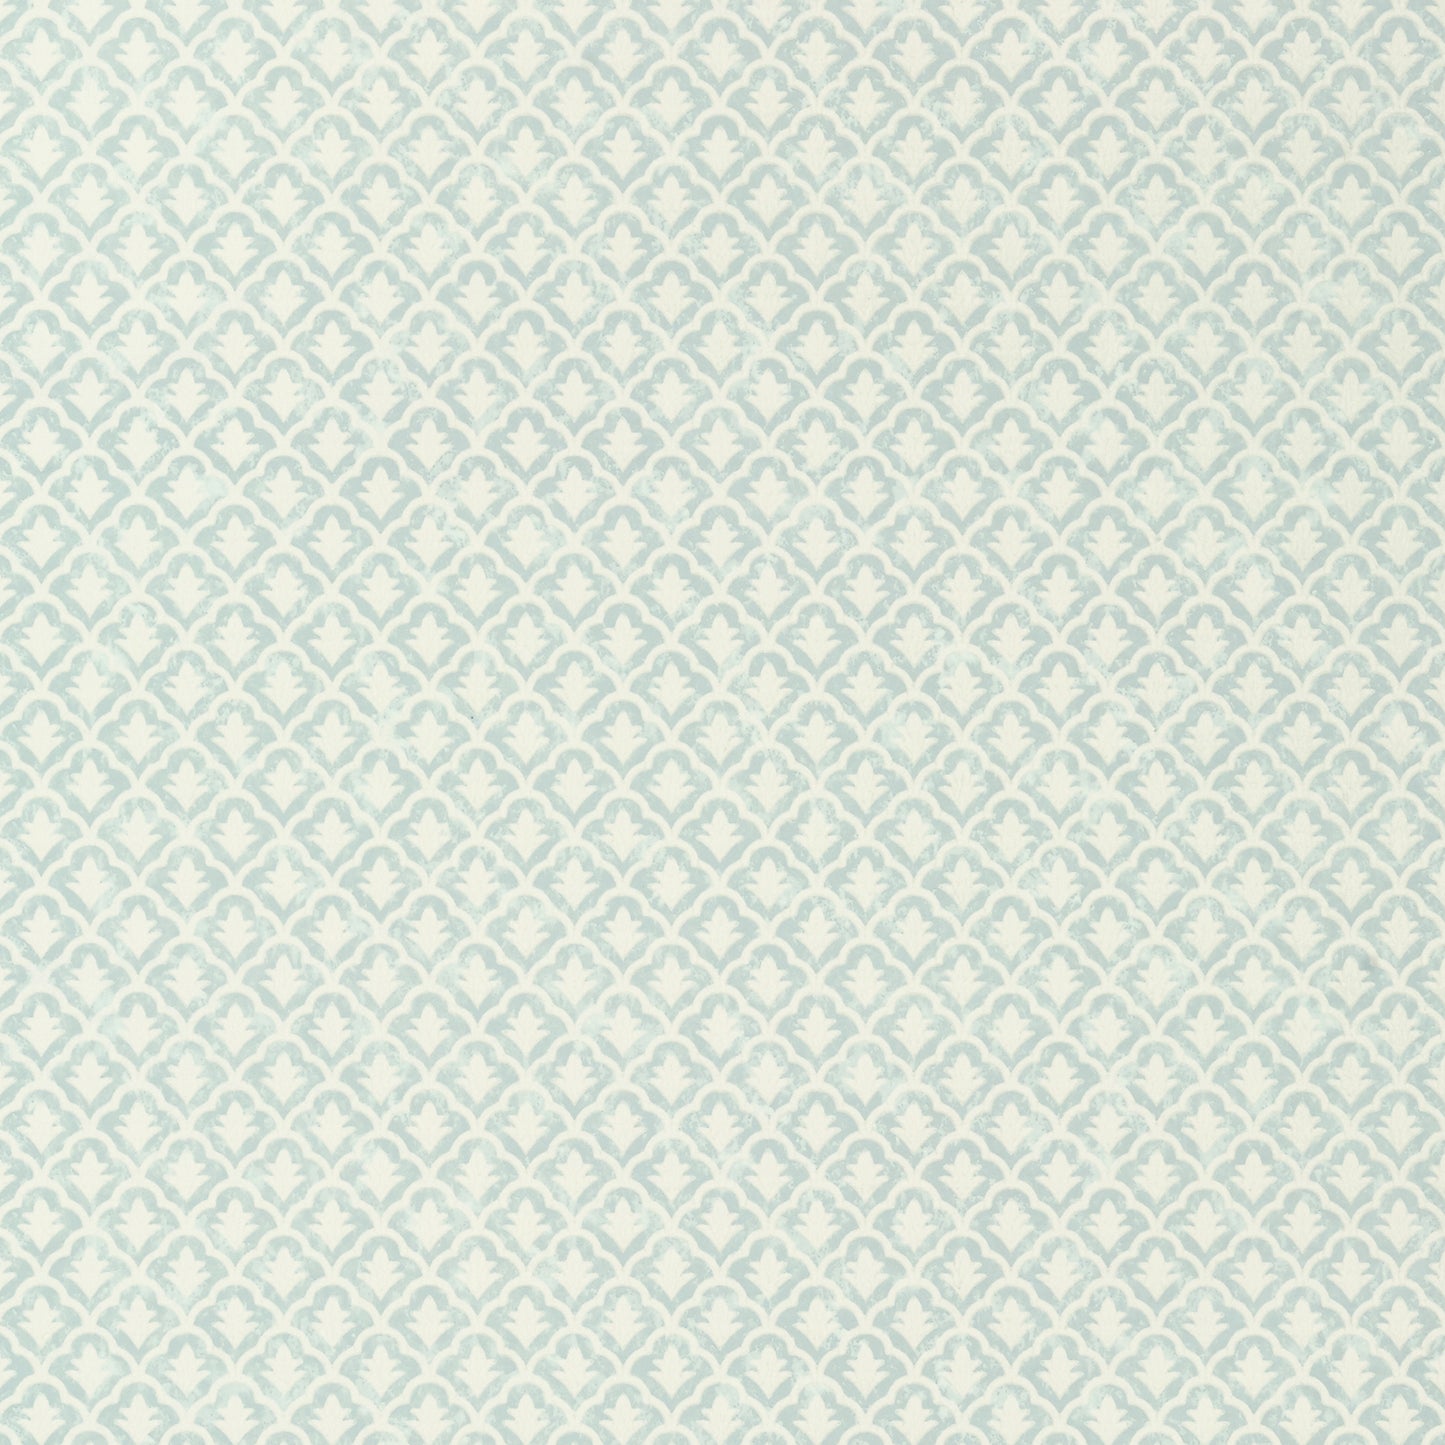 Purchase  Ann French Wallpaper Item AT79142 pattern name  Fairfield